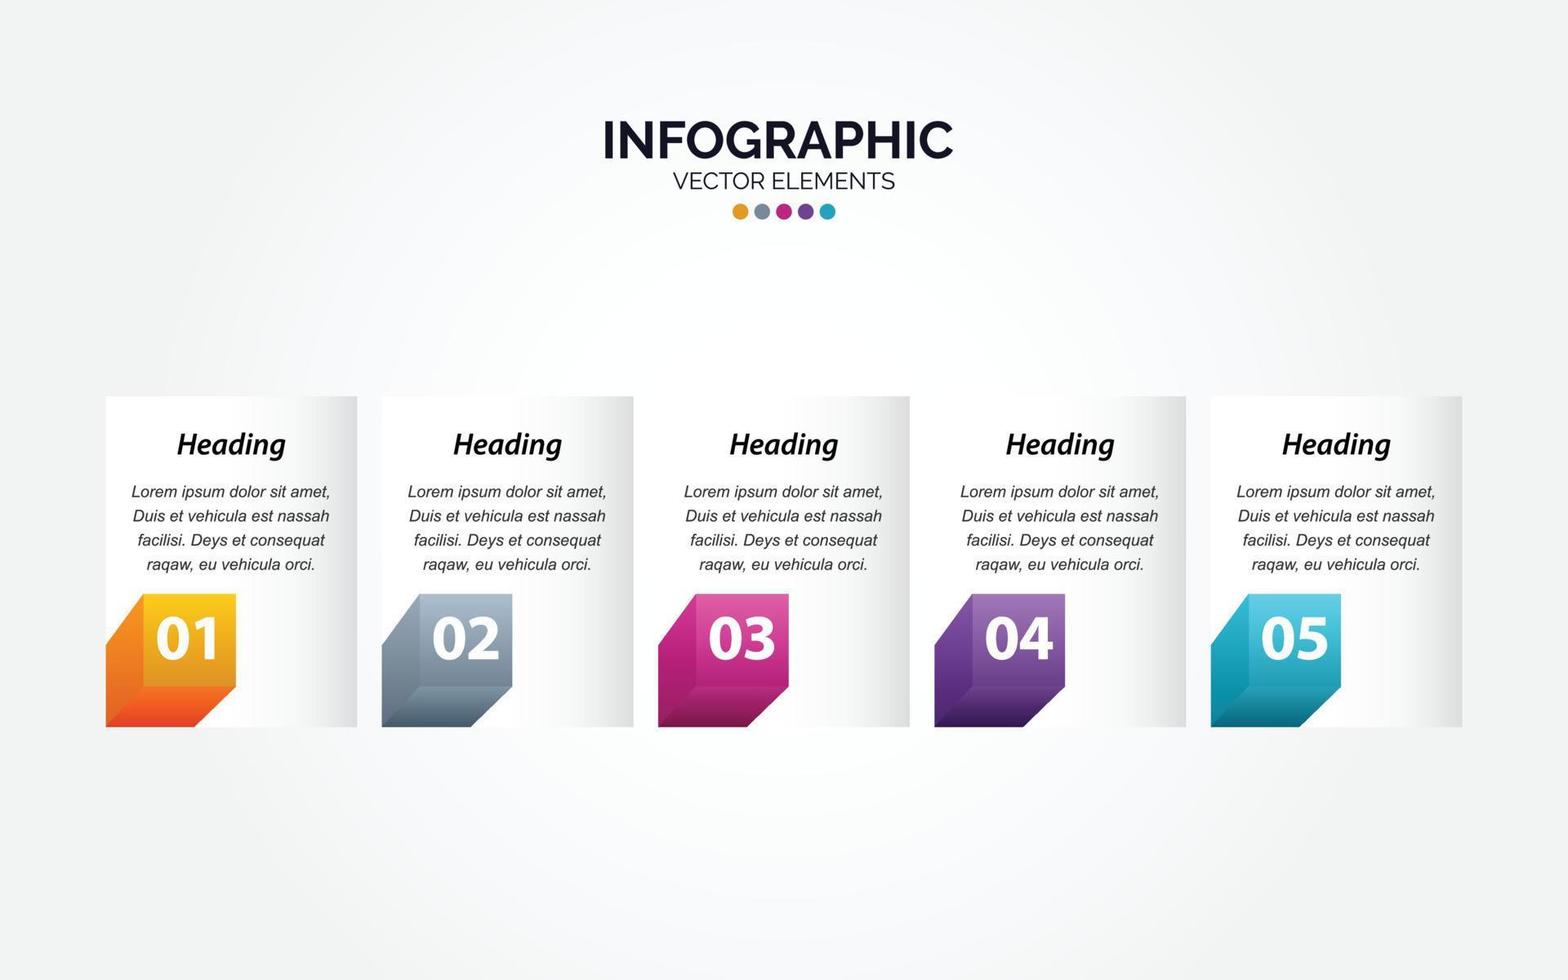 Business Horizontal Infographic design template with icons and 5 five options or steps. vector